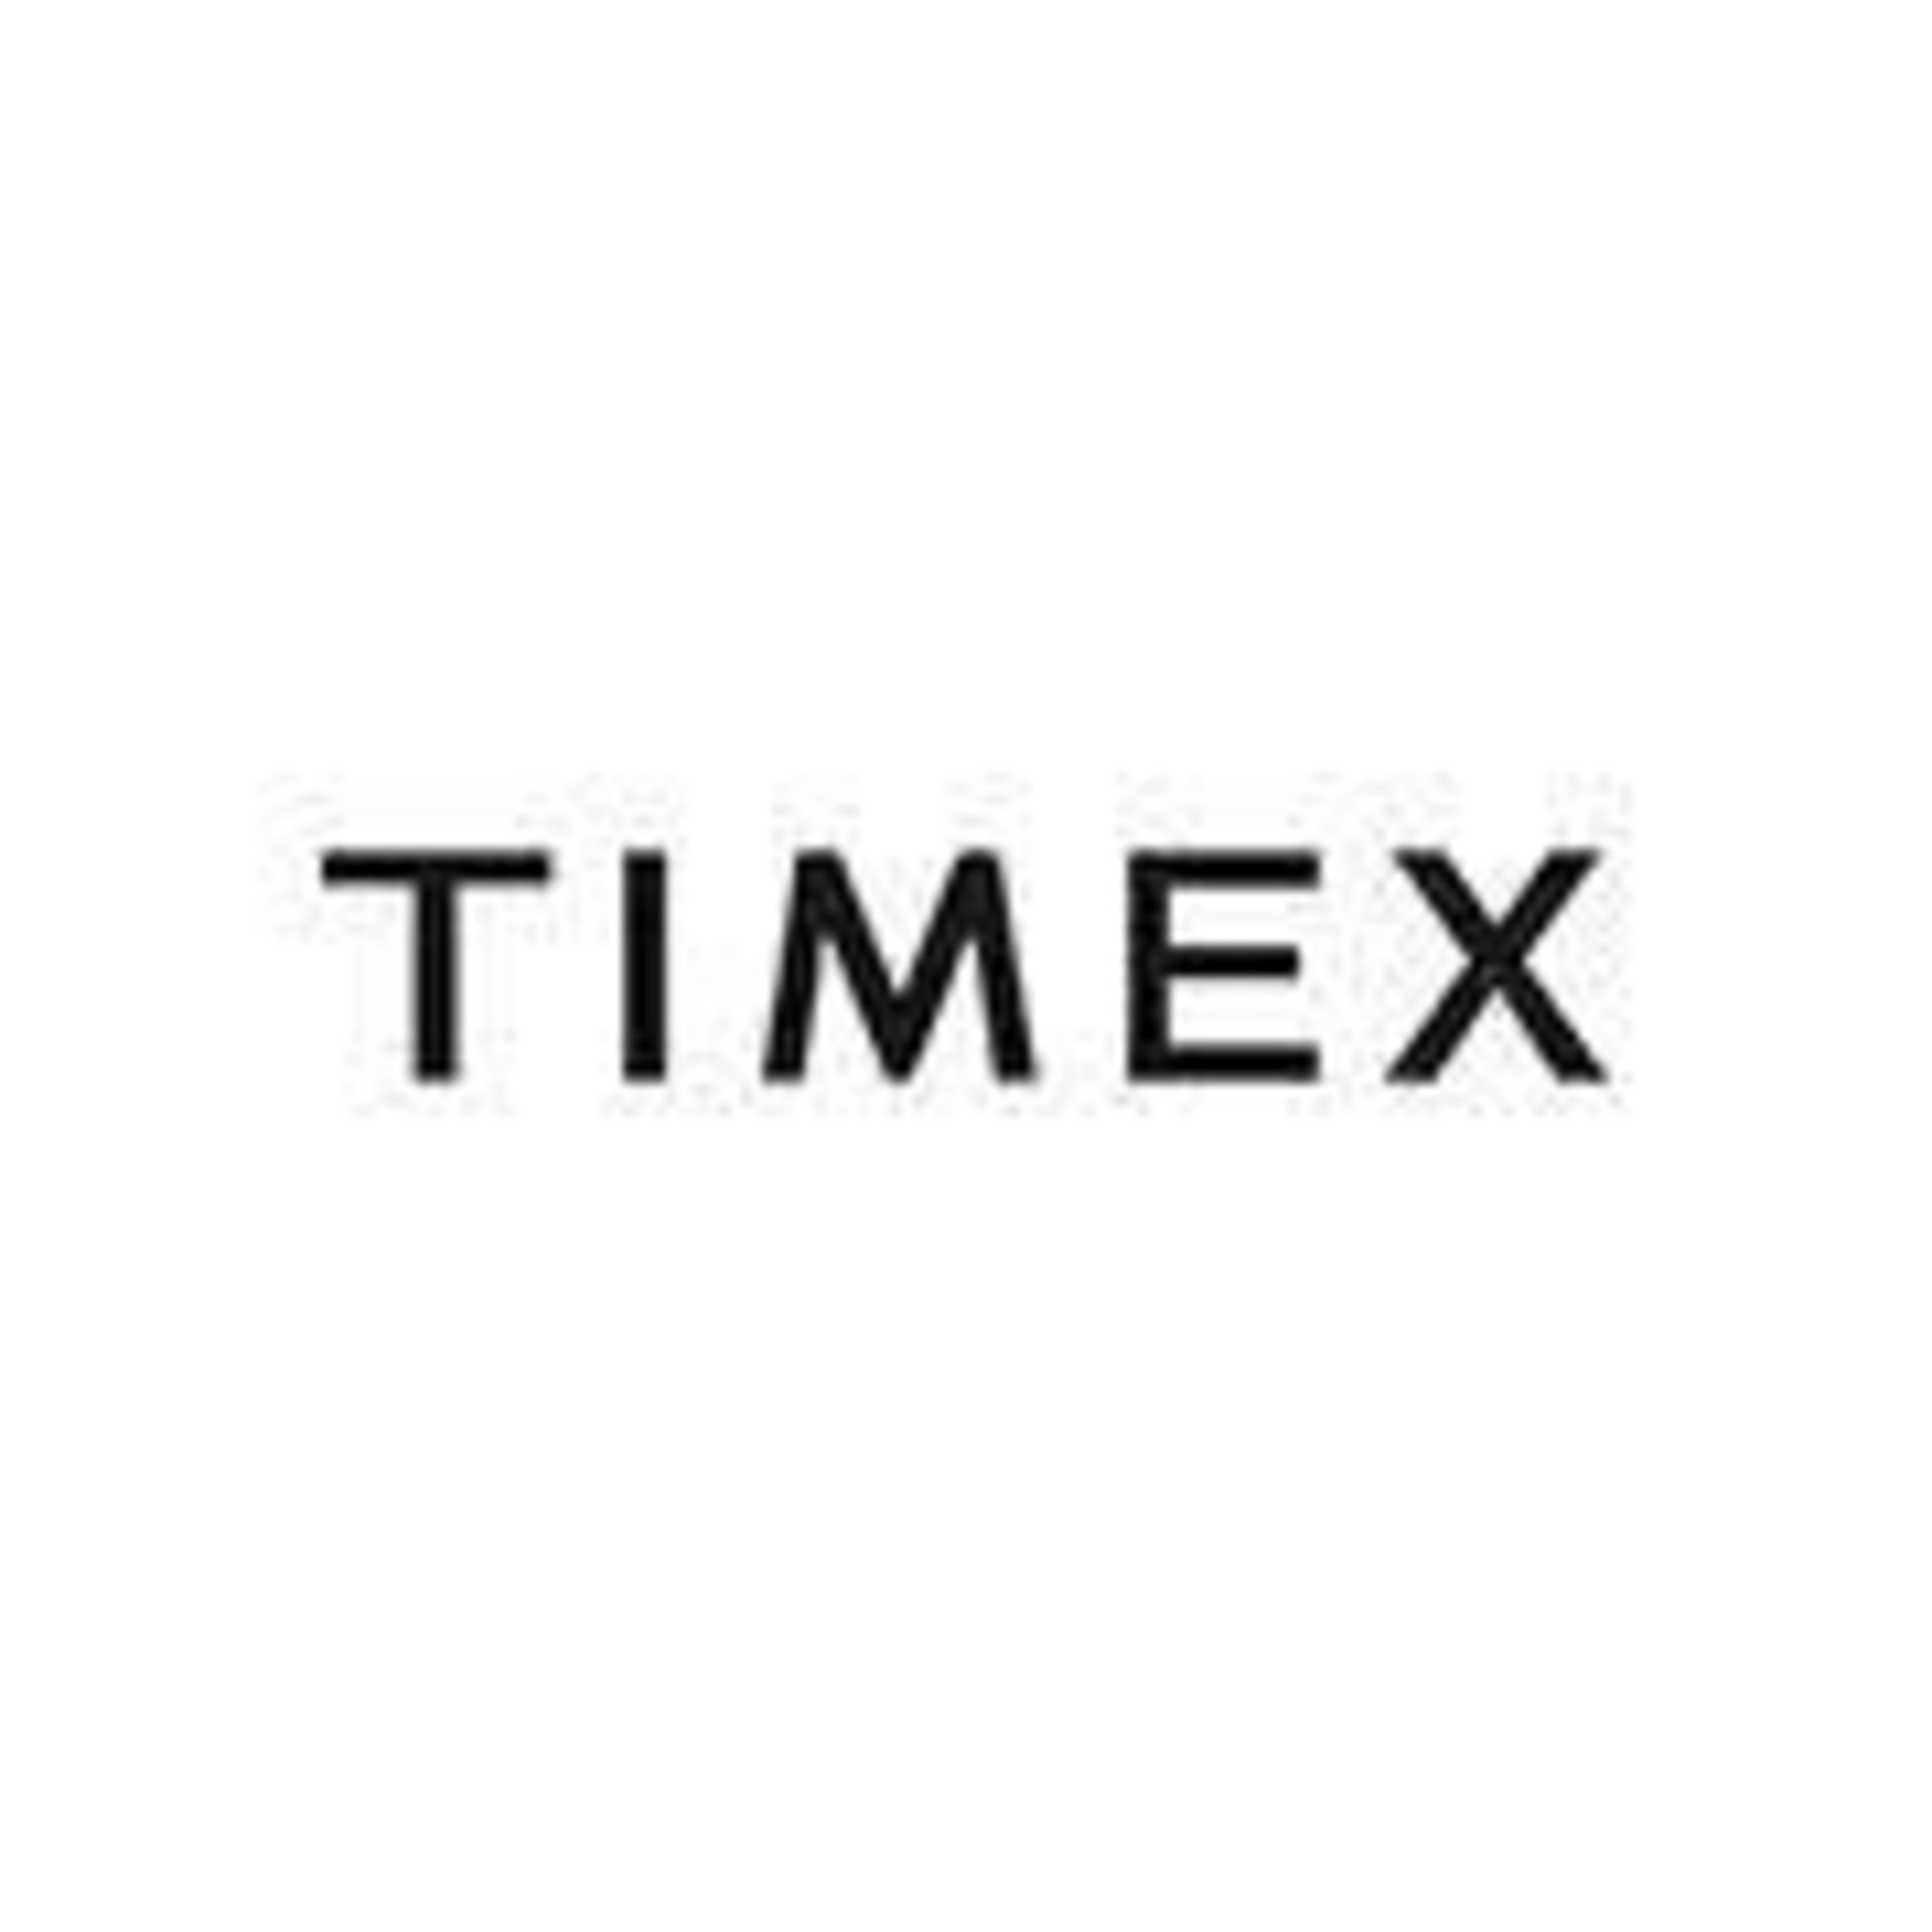 TimexCode